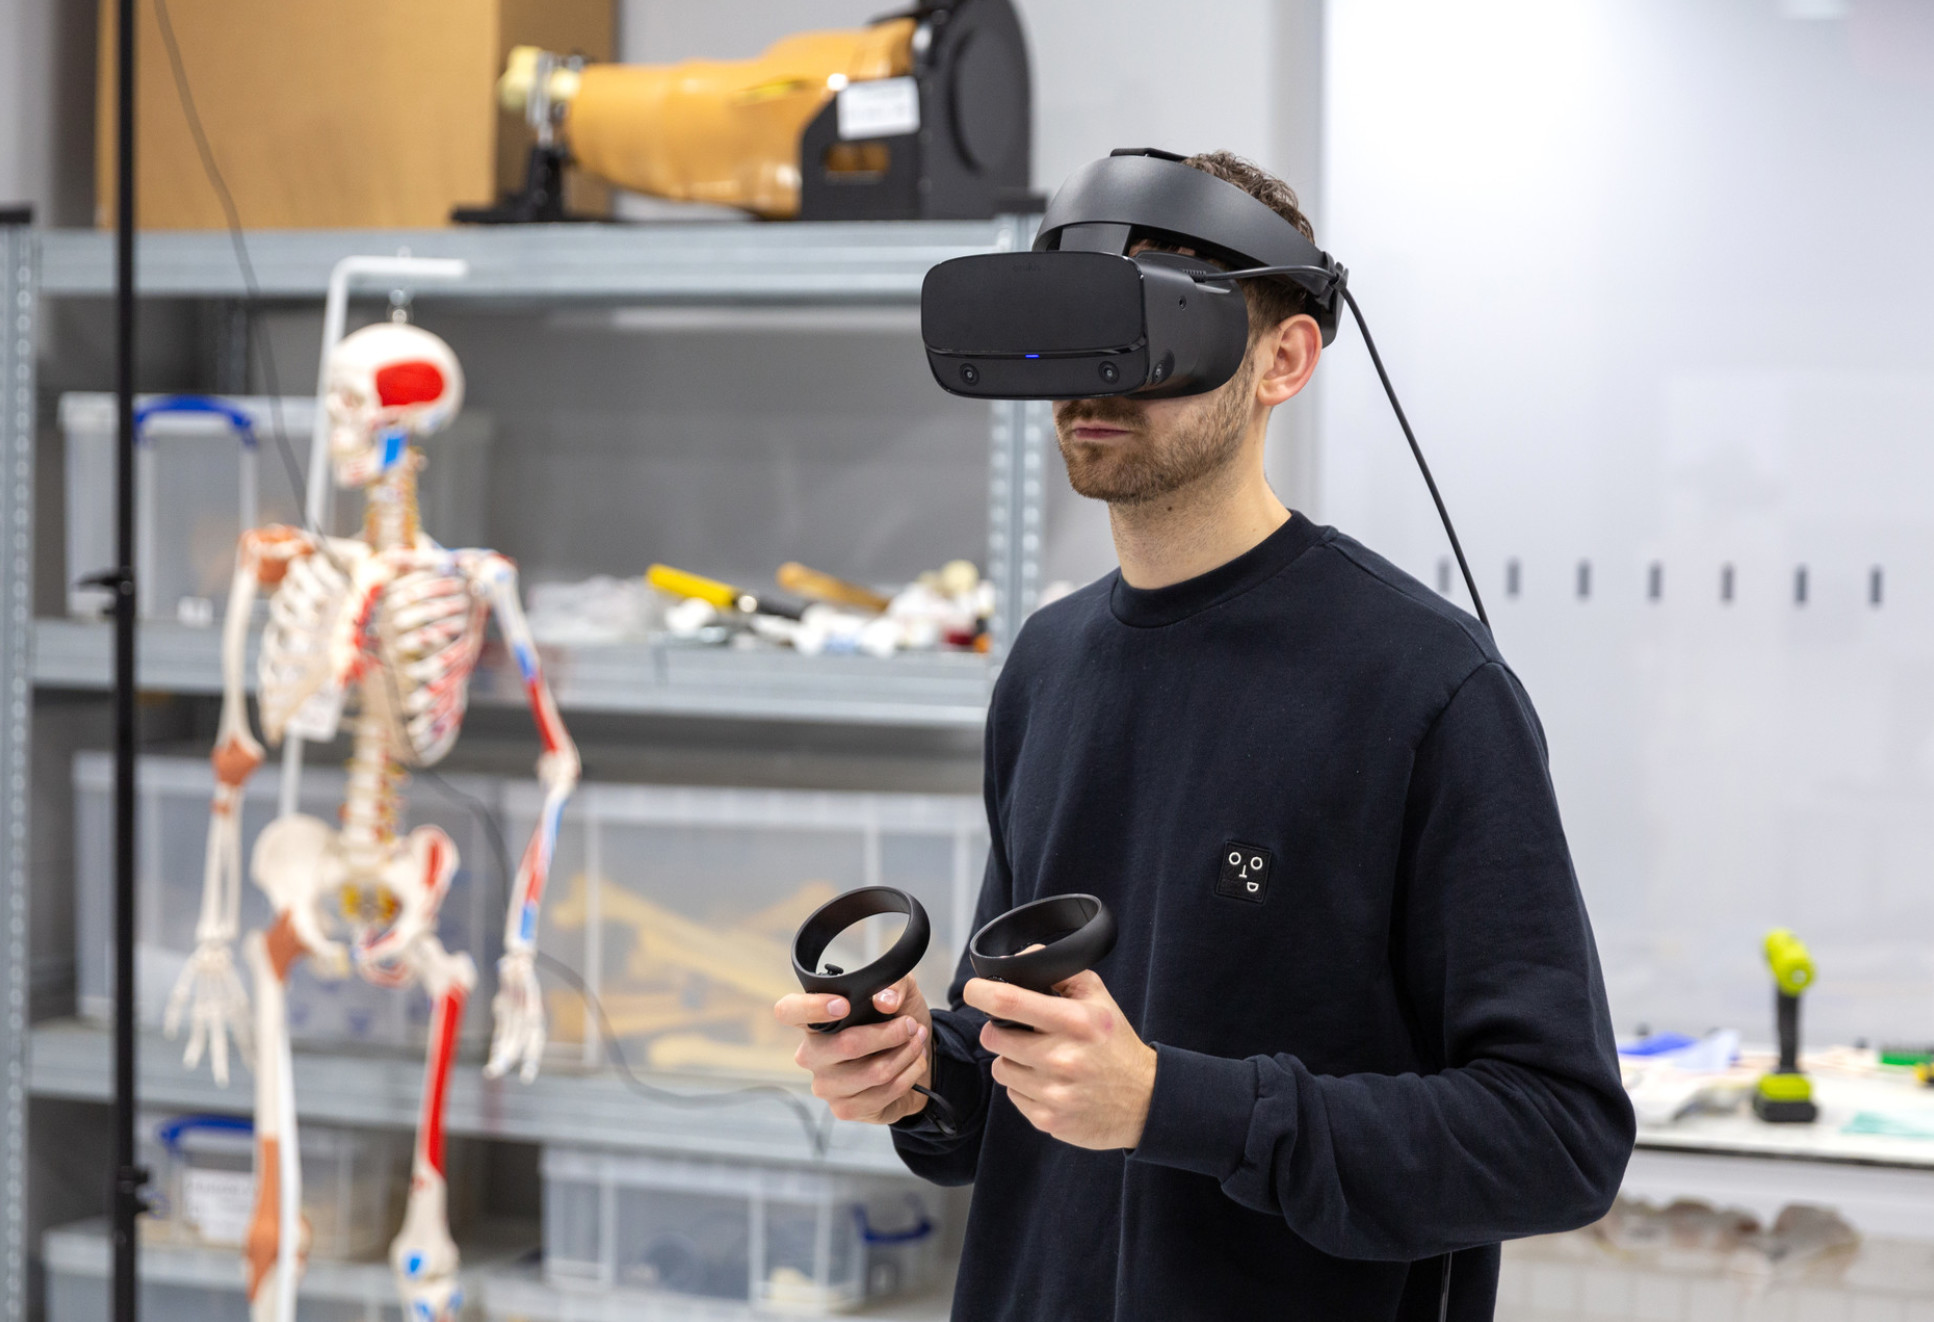 Using virtual reality to enhance surgical education in orthopaedics